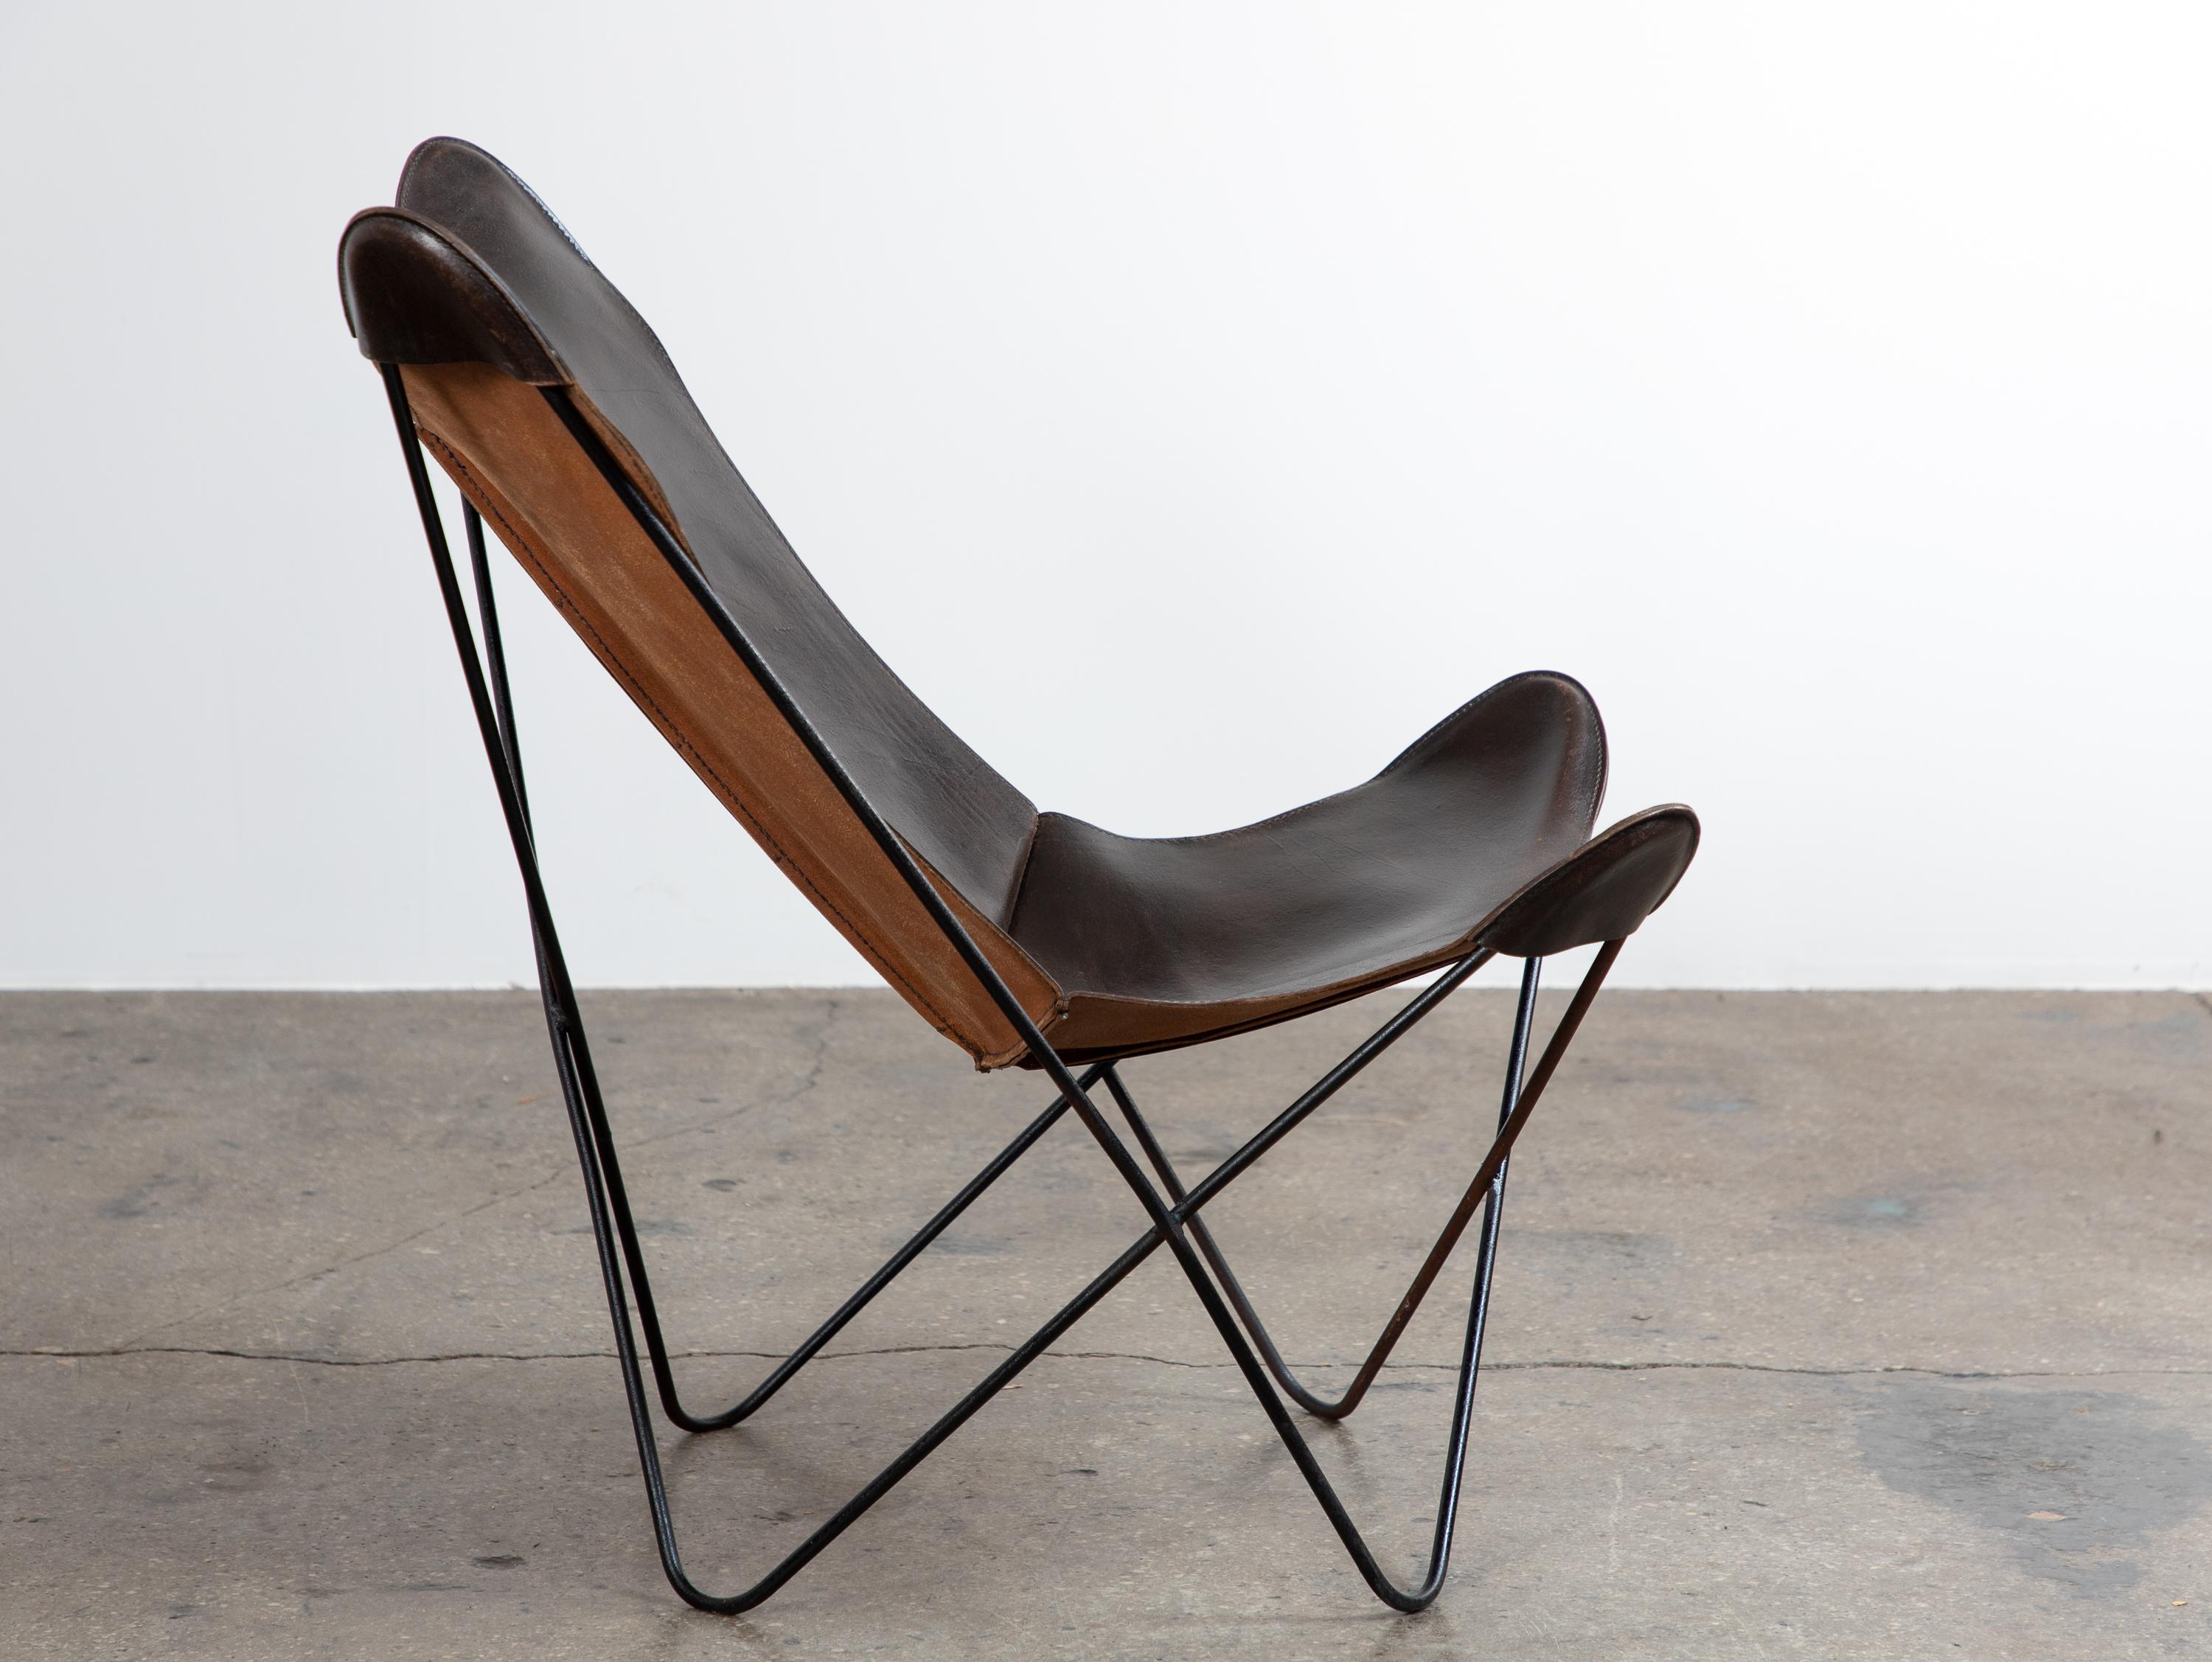 American Original Deep Brown Leather Hardoy Butterfly Chair, Issued by Knoll, 1950s For Sale